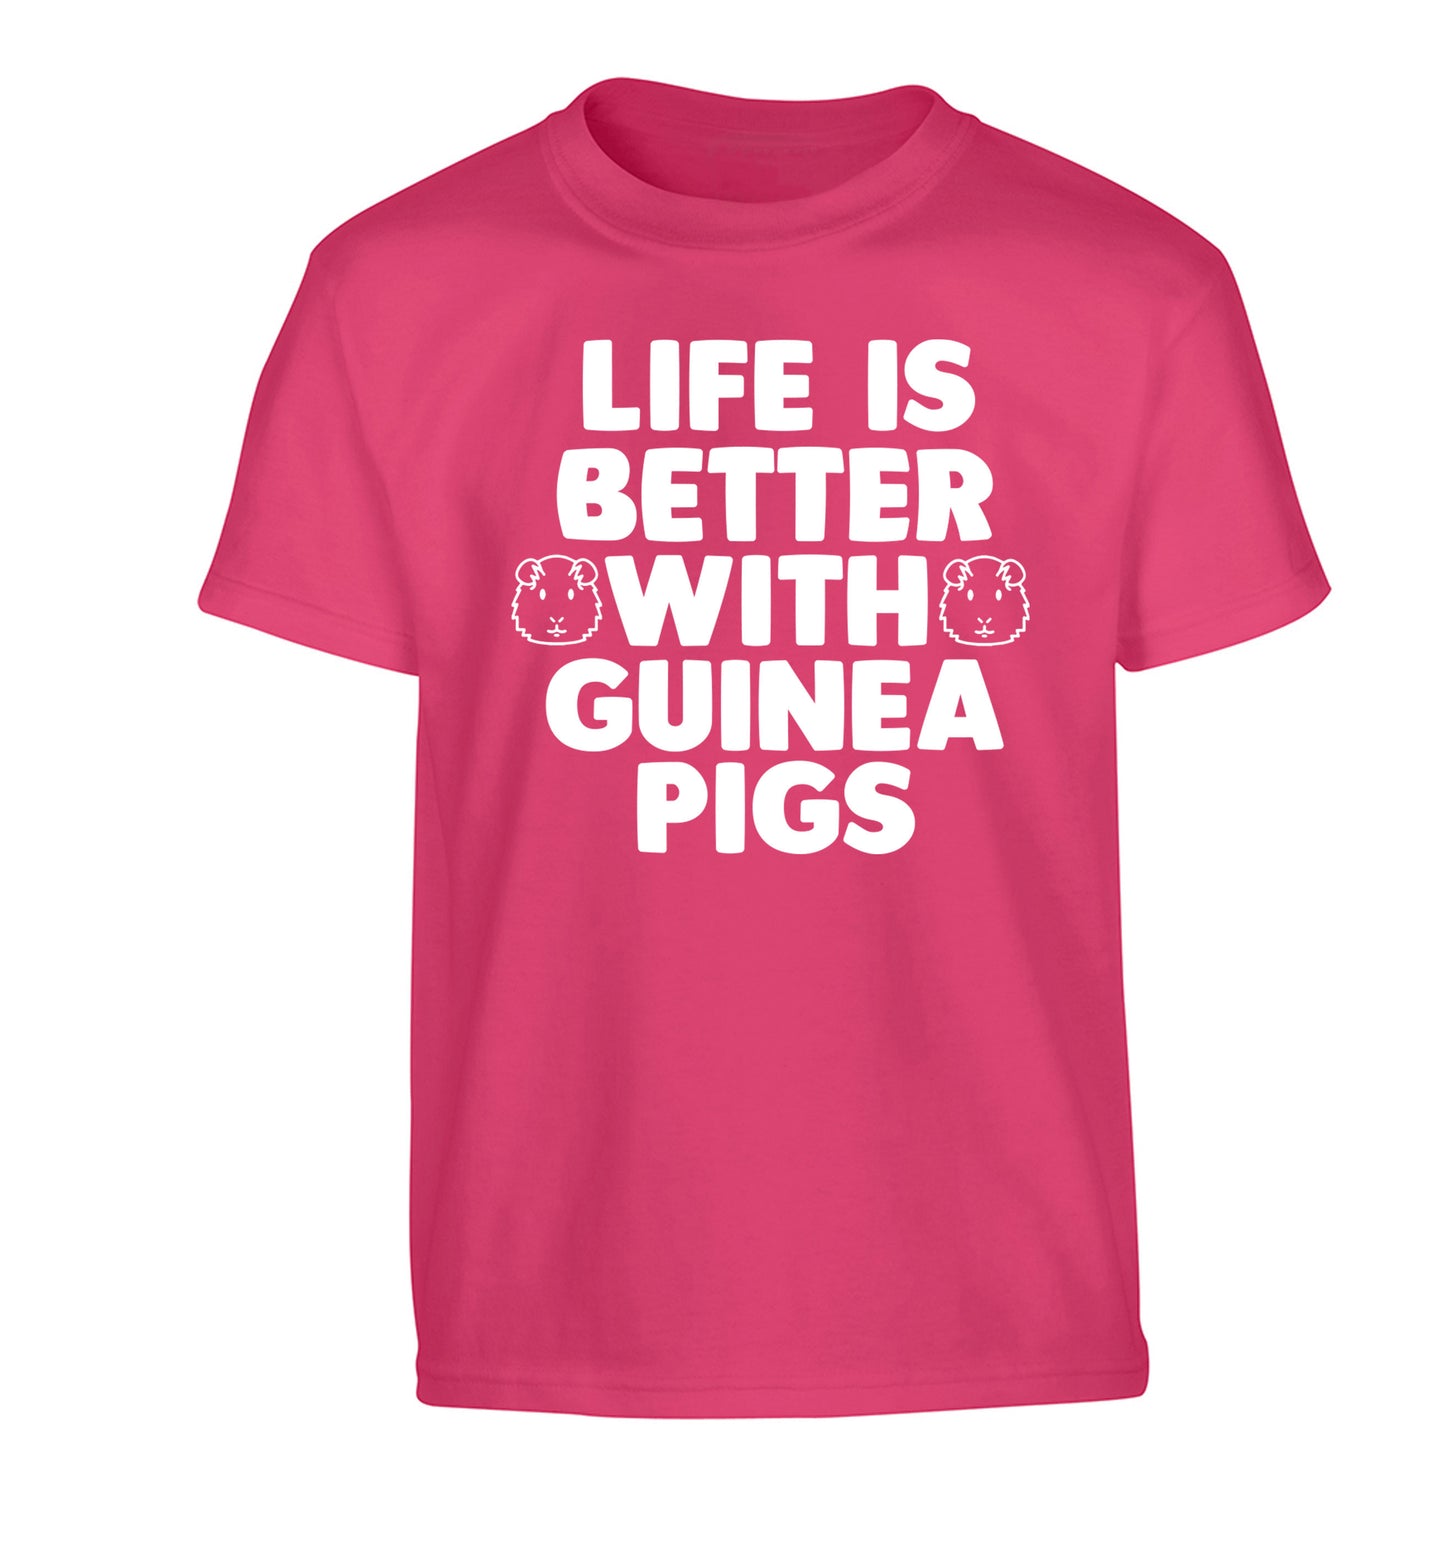 Life is better with guinea pigs Children's pink Tshirt 12-14 Years